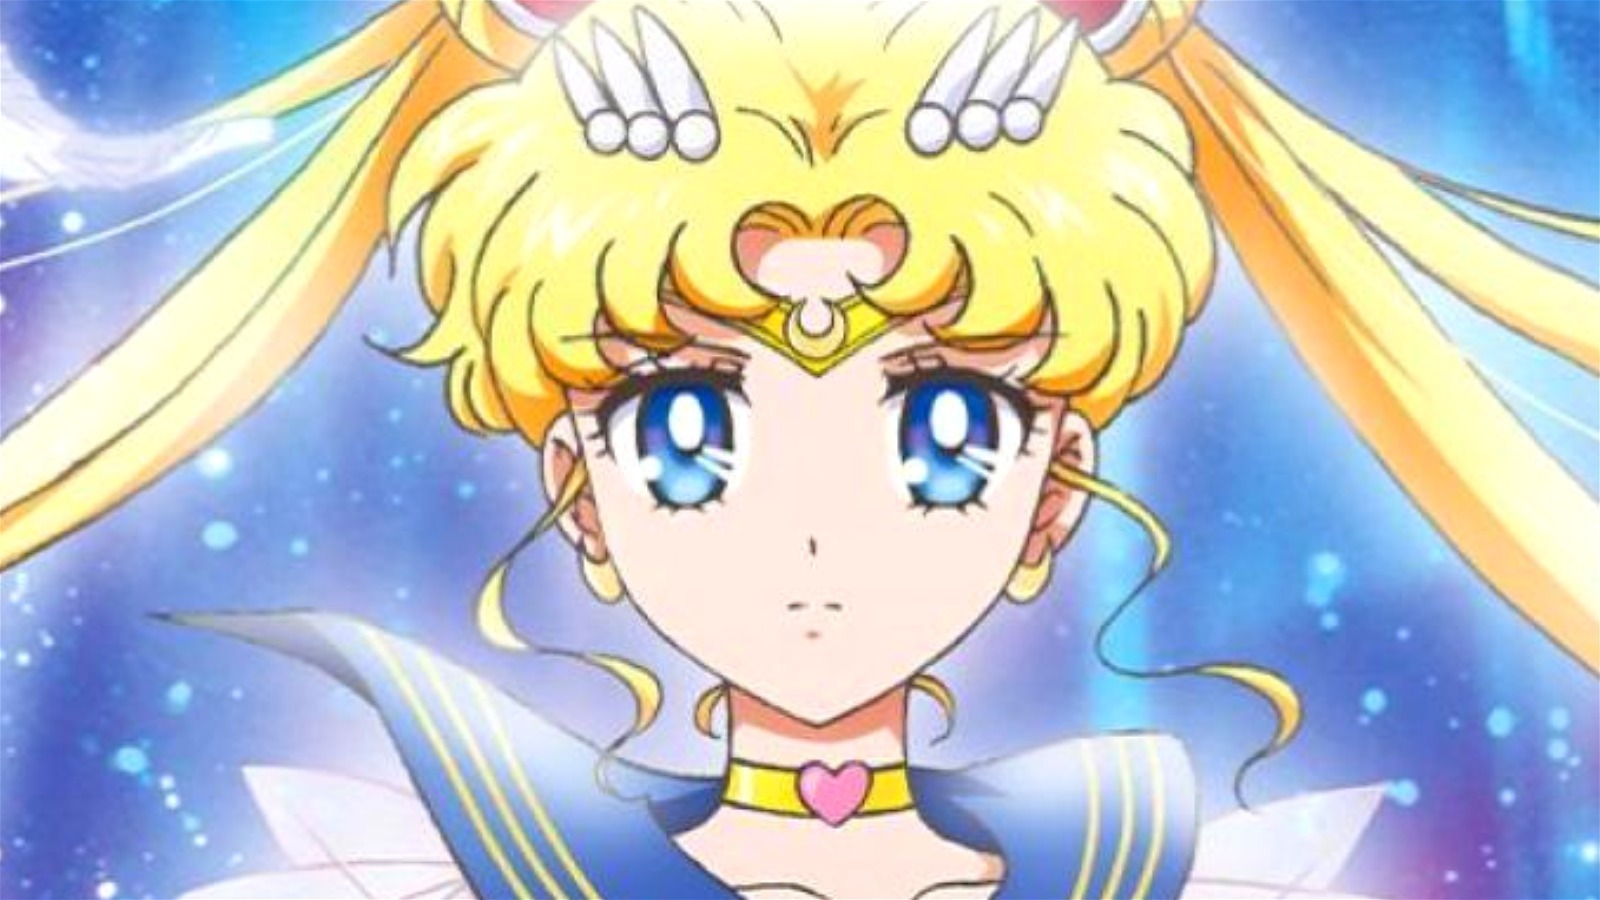 Sailor Moon Crystal Recap: What You Need to Know Before Netflix's